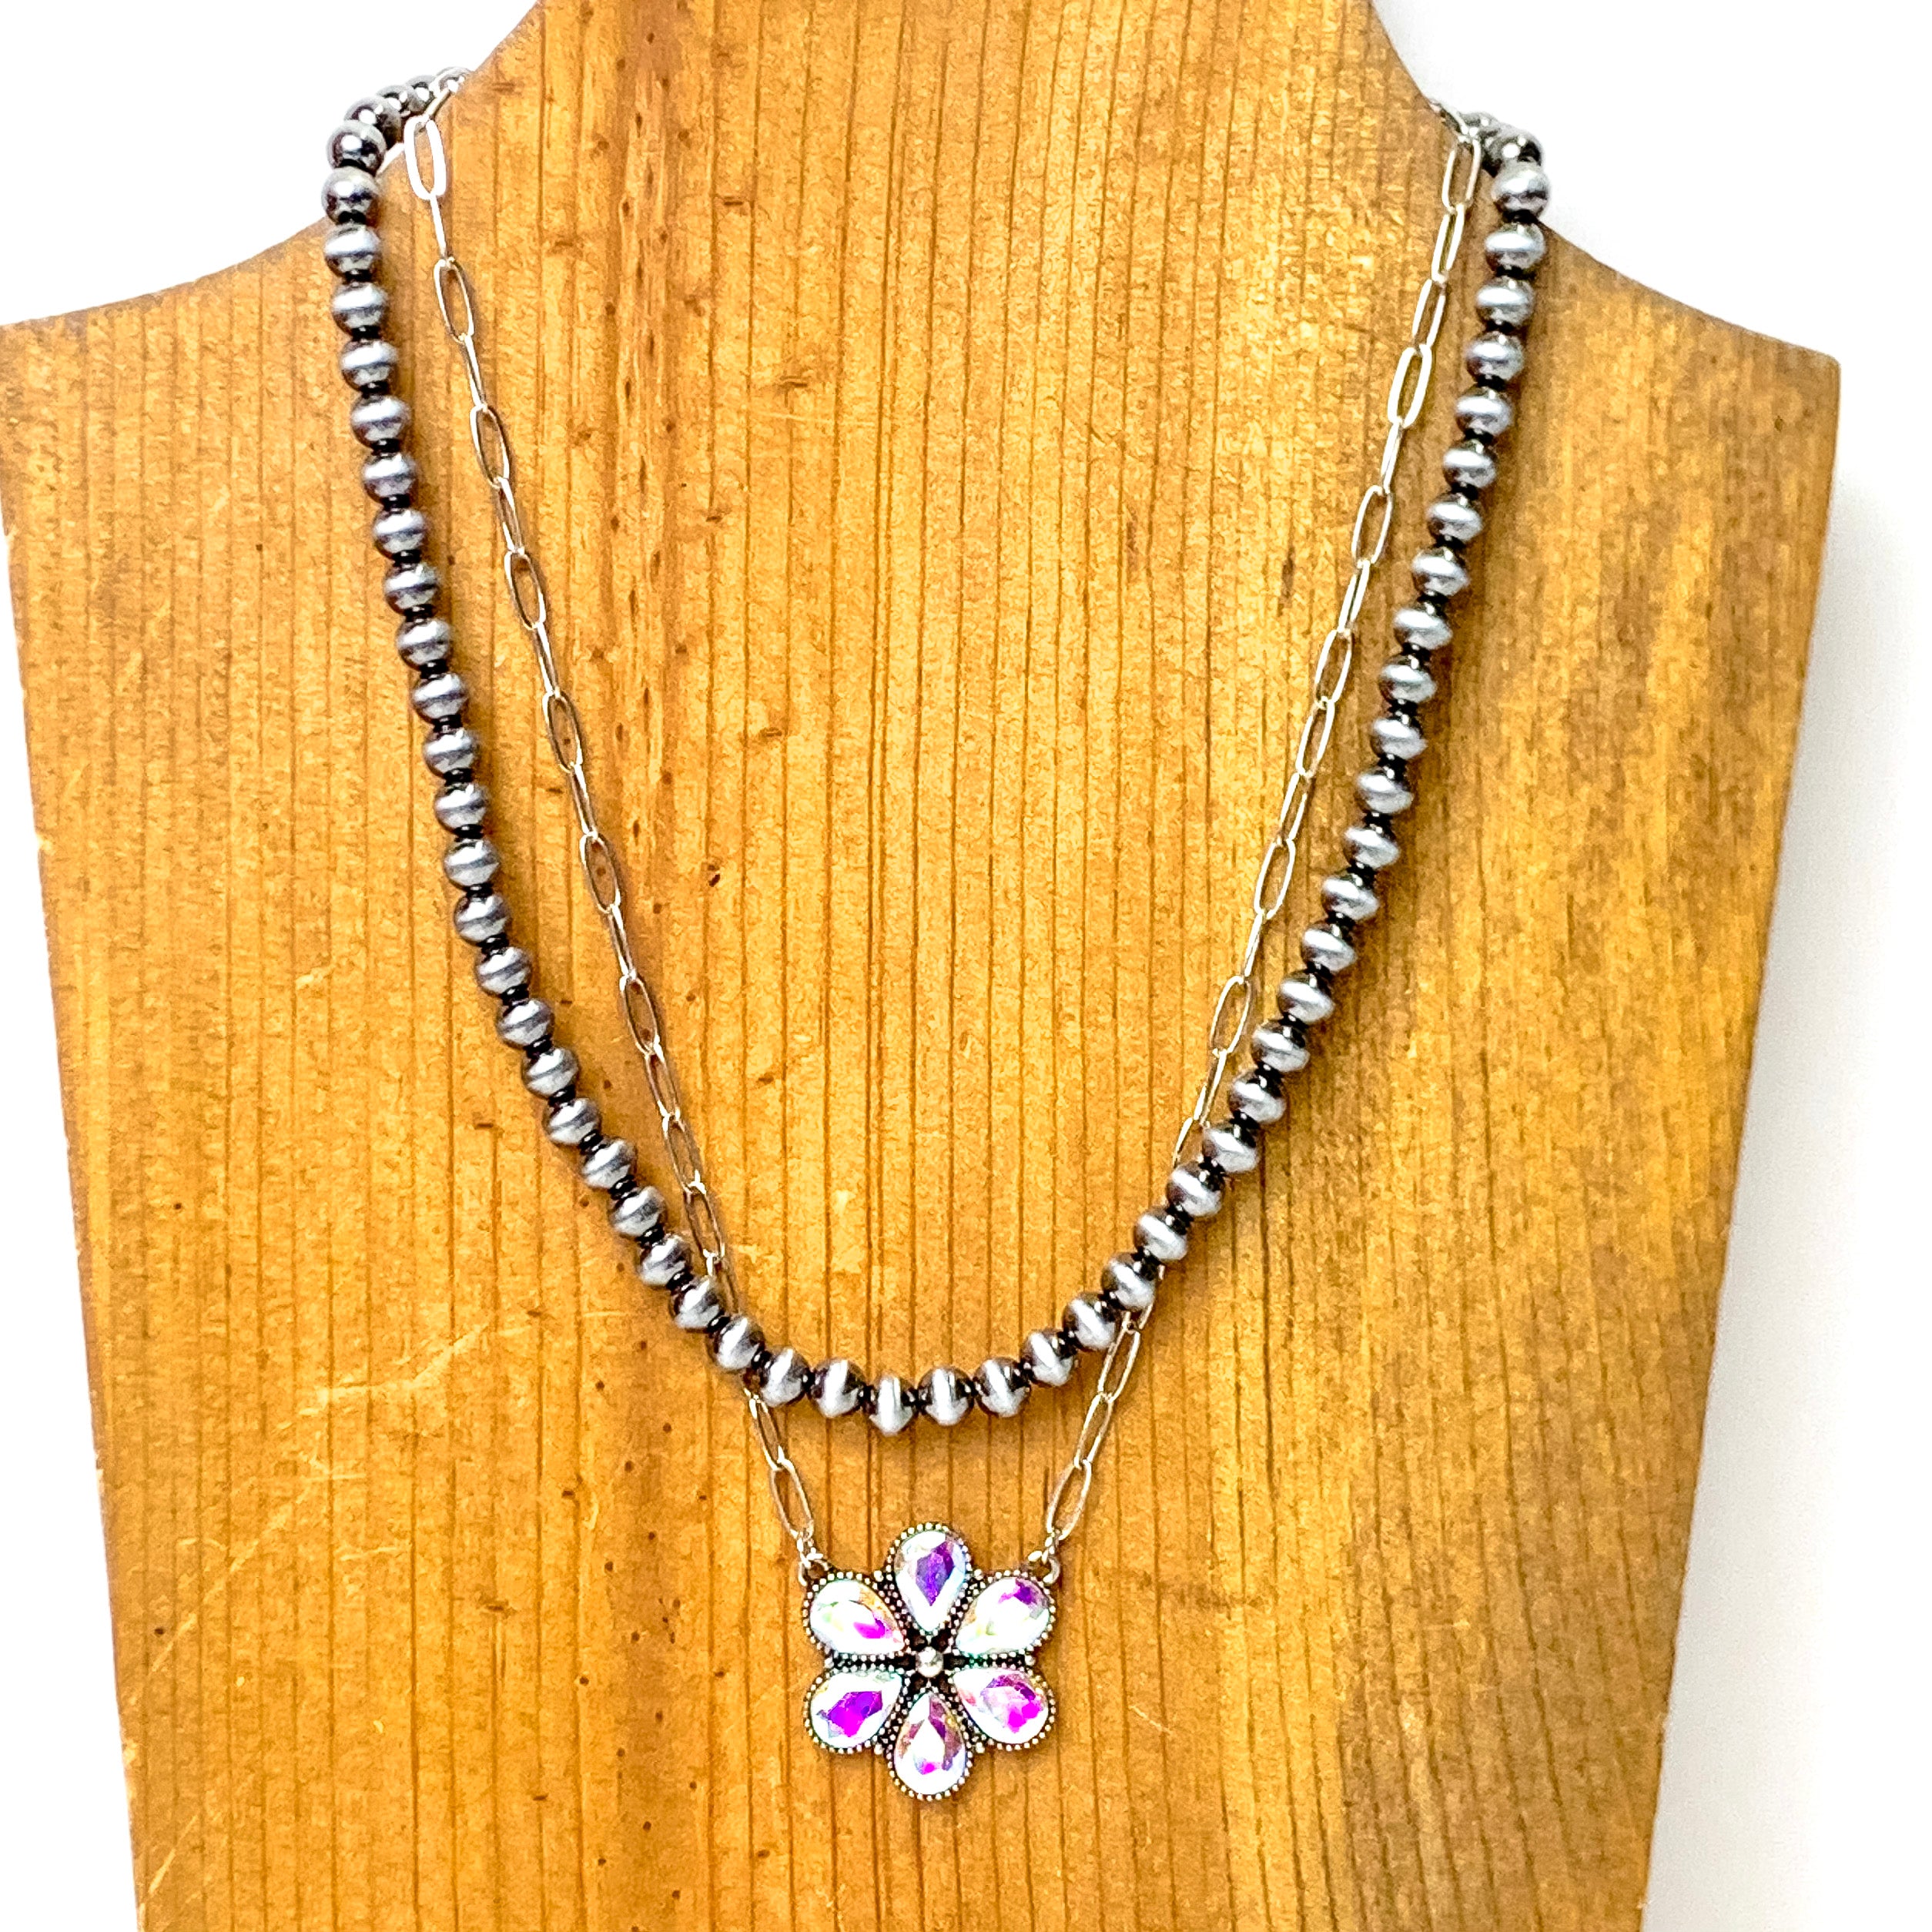 Prairie Petals Faux Navajo Pearl and Chain Necklace in Silver Tone - Giddy Up Glamour Boutique